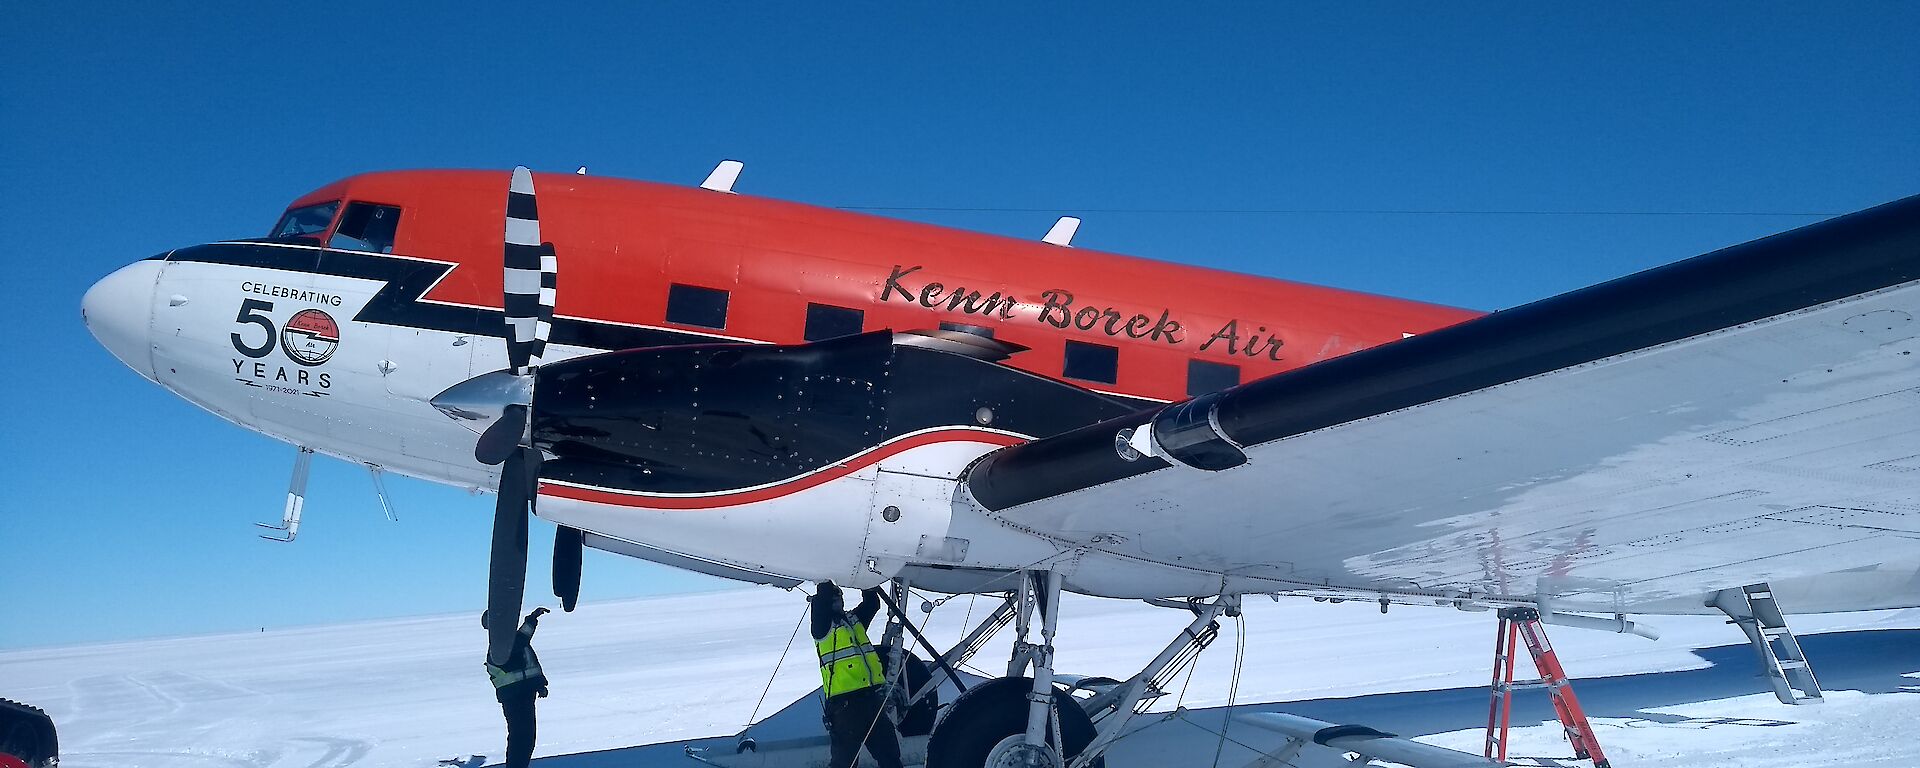 A red DC-3 Basler parked on the snow with a person working underneath it